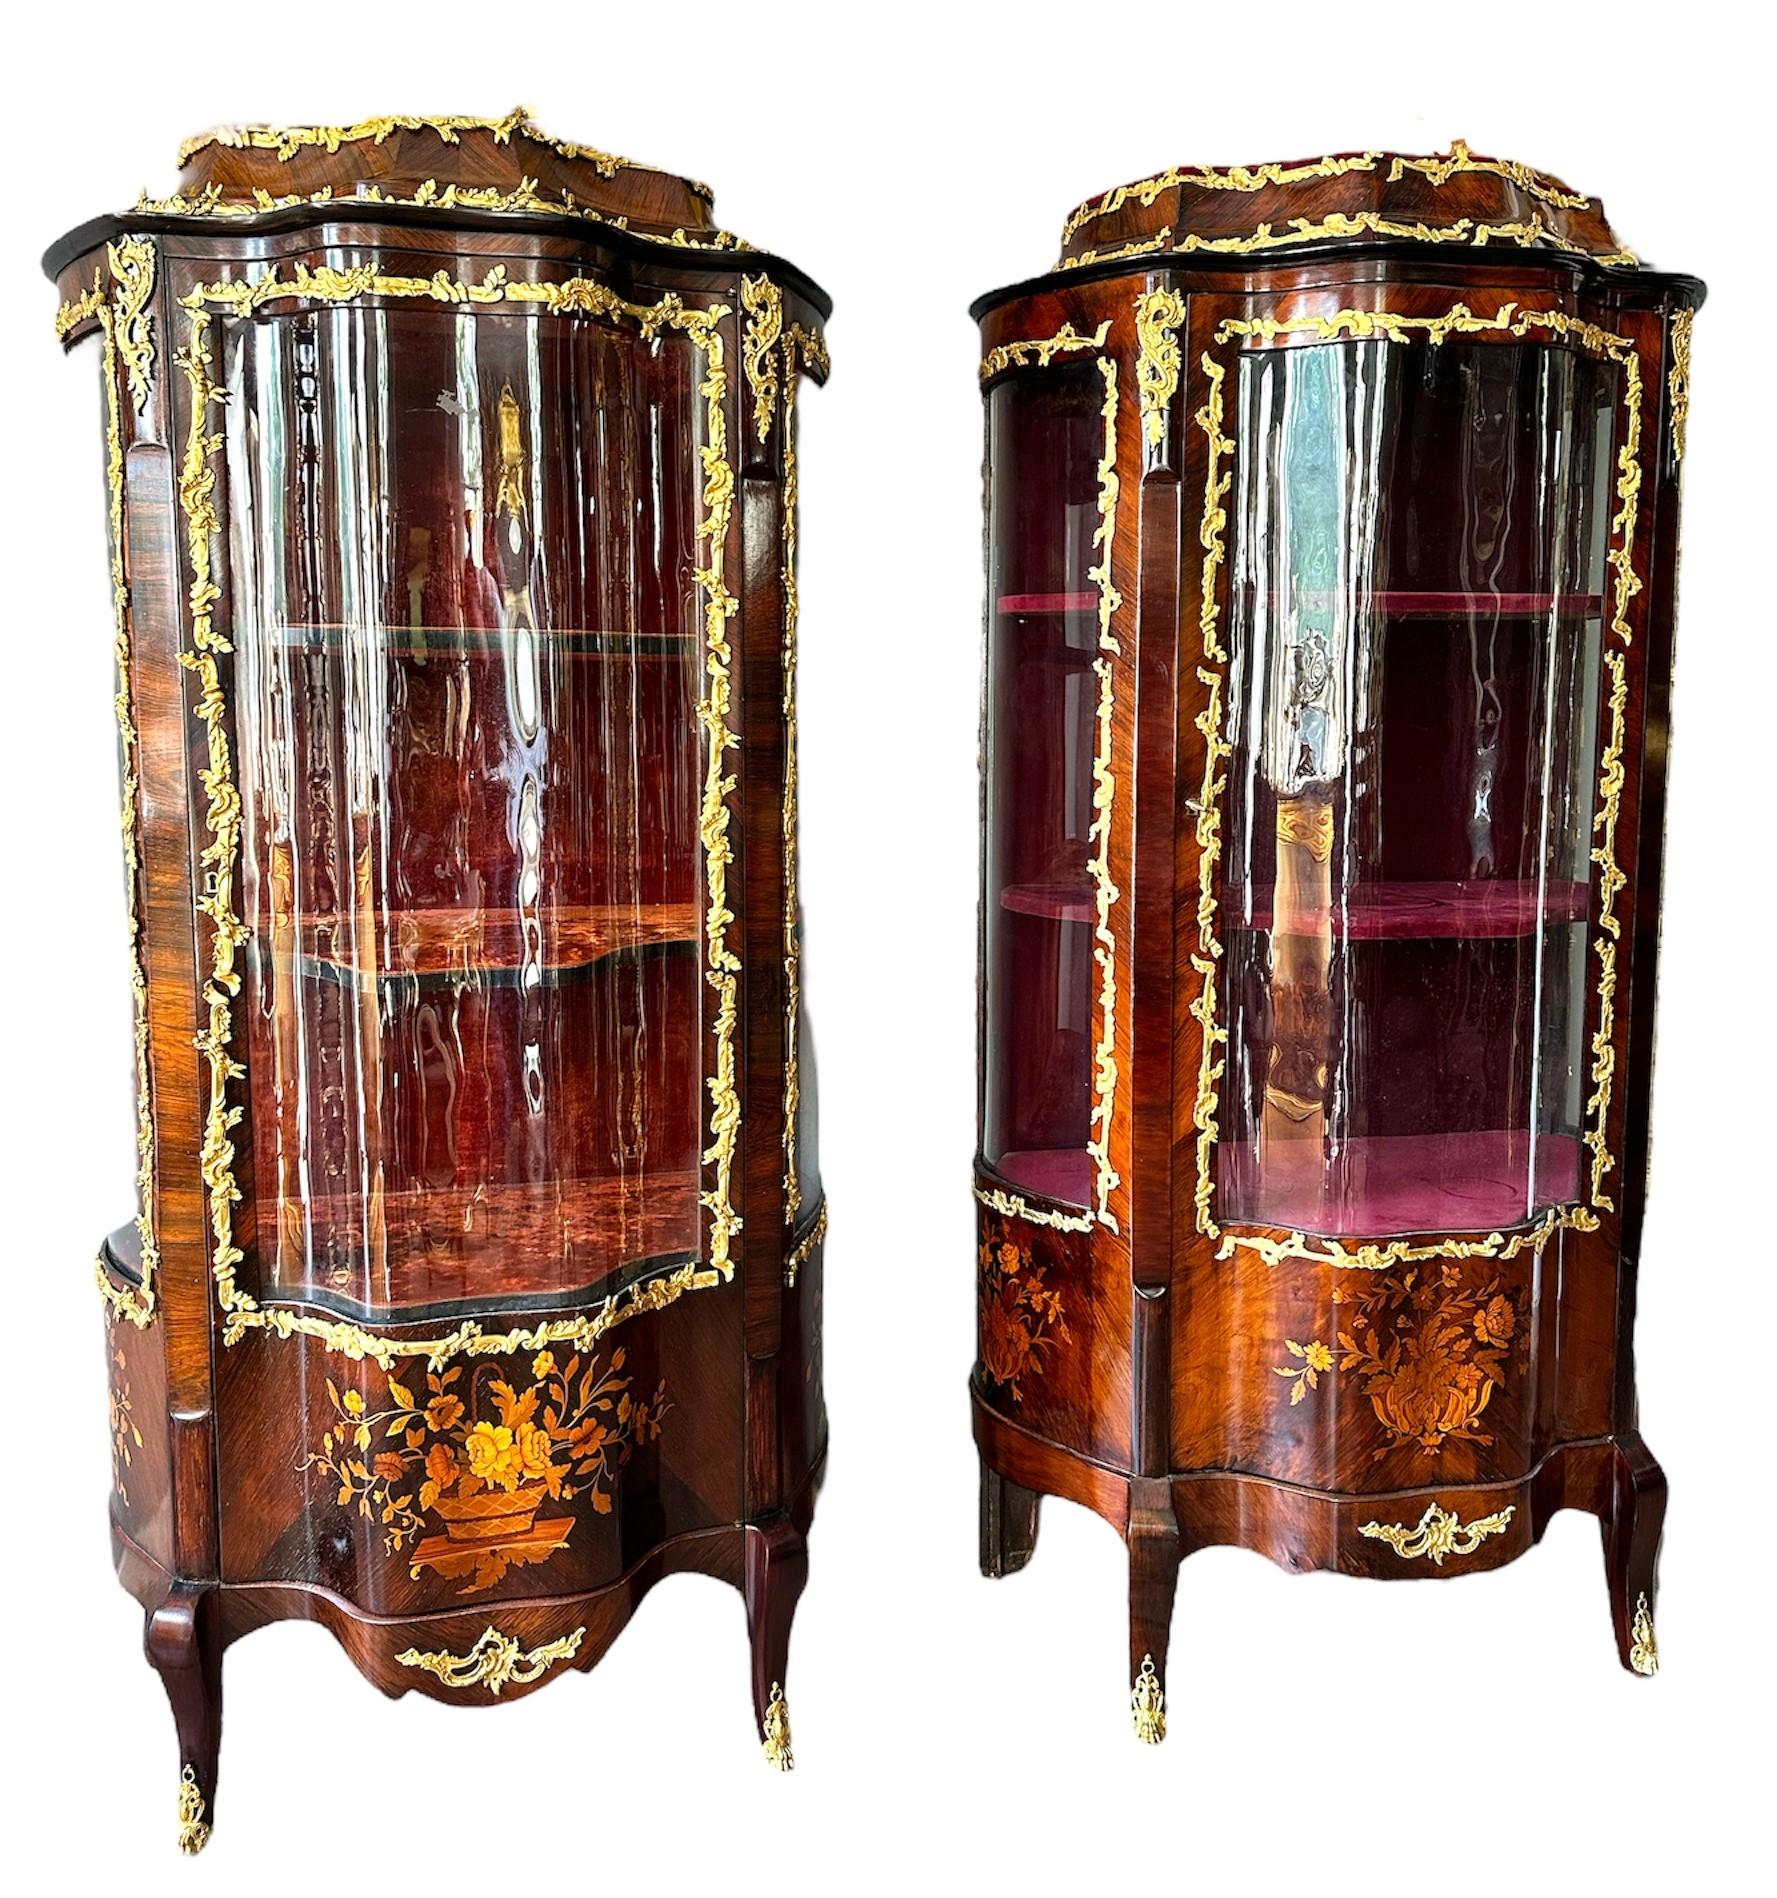 Elegant pair of display cases made of rosewood with fruitwood inlays. Adorned in the round with finely chiseled and gilded bronze elements.

France - Napoleon III

Measurements: H 171 x W 90 x D 48